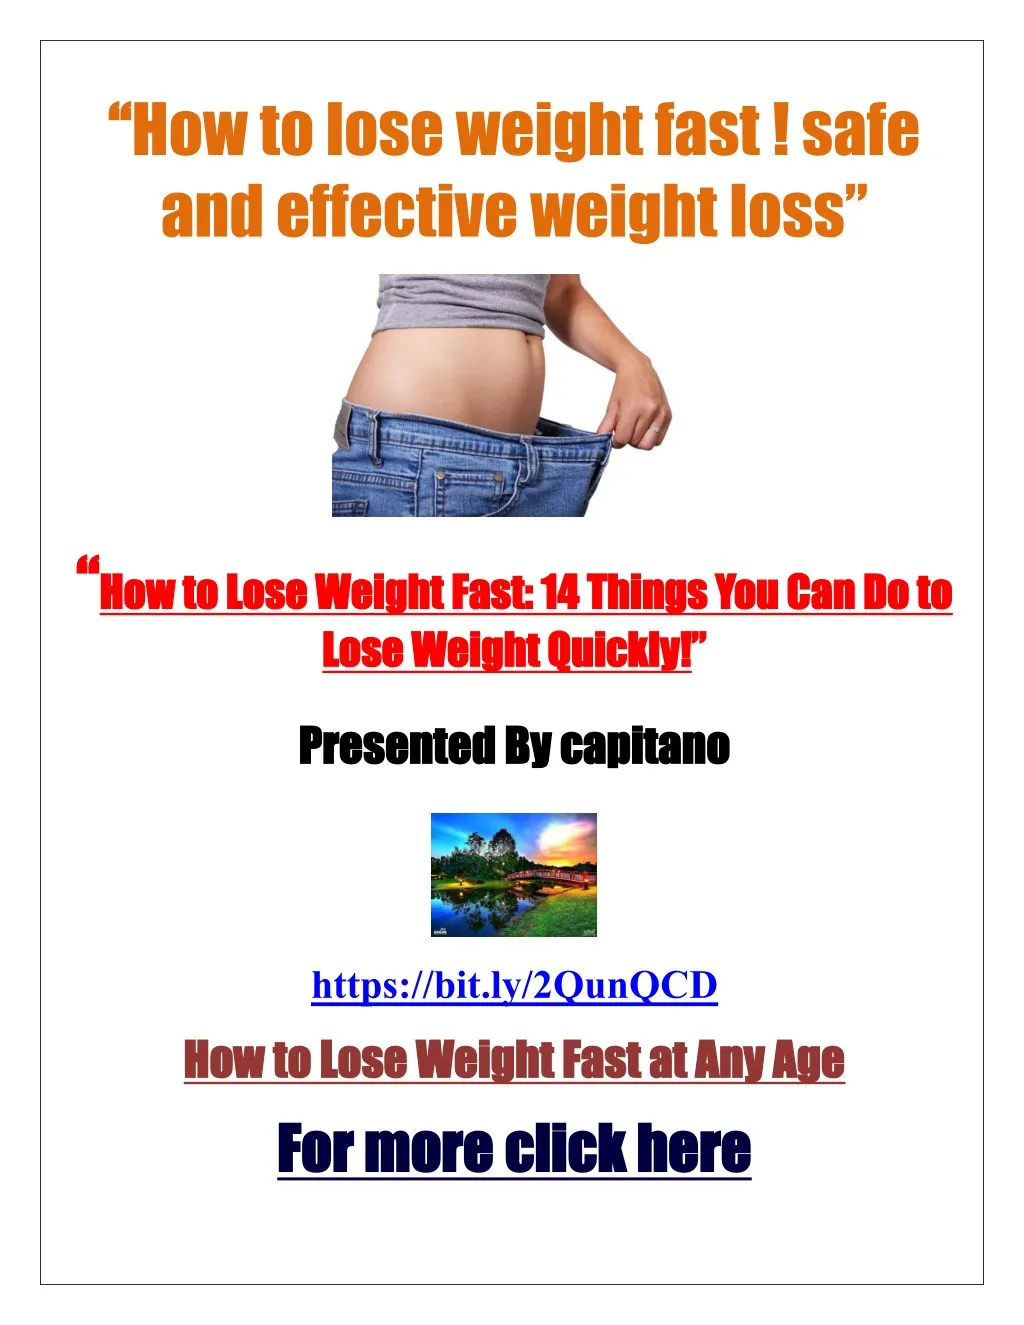 how to lose weight fast safe and effective weight